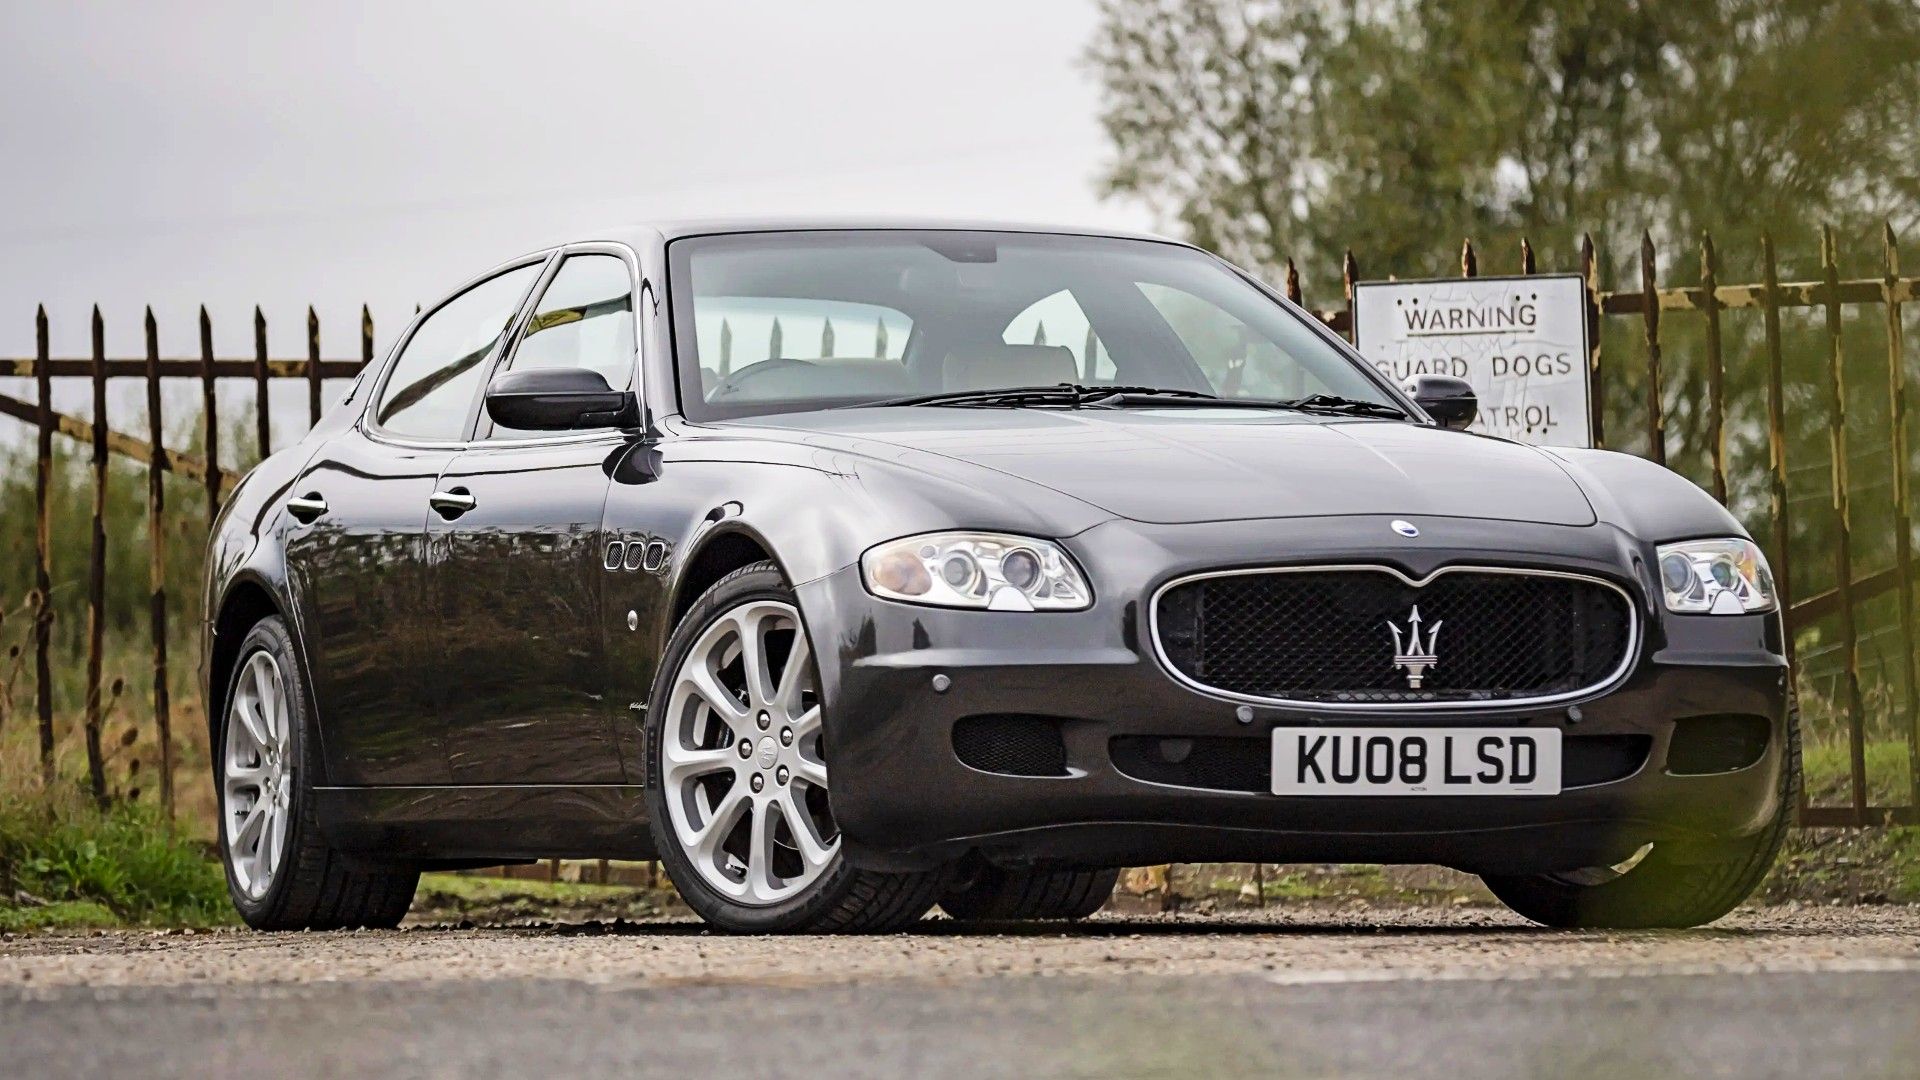 10 Affordable Luxury Cars That Look More Expensive Than They Are